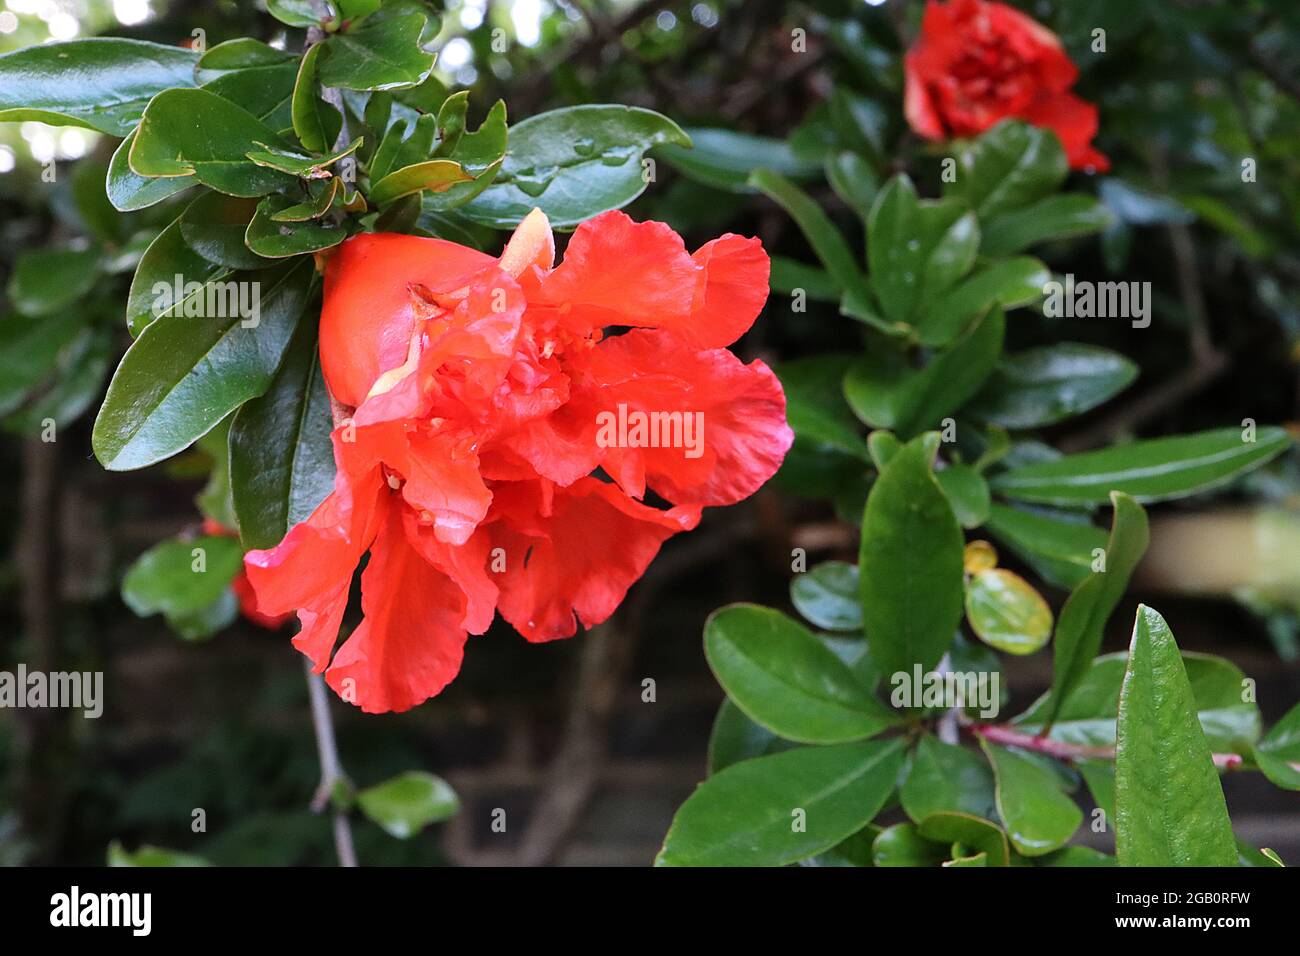 Punica granatum Pomegranate – double red flowers emerging from thick sepal, dark green glossy leaves,  June, England, UK Stock Photo